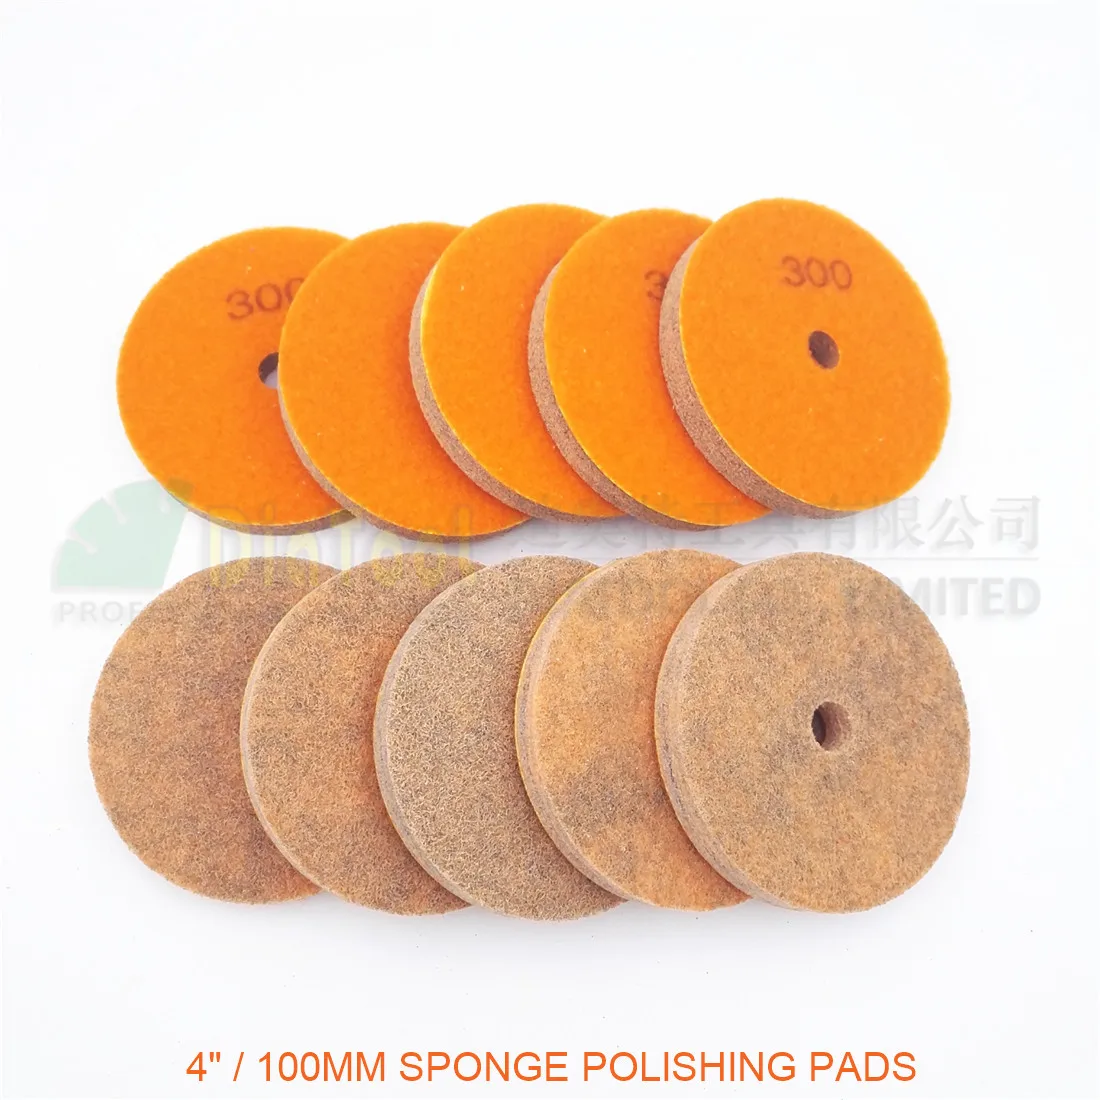 DIATOOL 10pcs 4inches Diamond Sponge Polishing Pads For Soft Stone Marble Artificial Stone Terrazzo Grit #300 Diameter 100MM dt diatool 2pcs 5 8 11thread dia25mm laser welded diamond dry drill core bits drilling hard granite marble nature stone hole saw